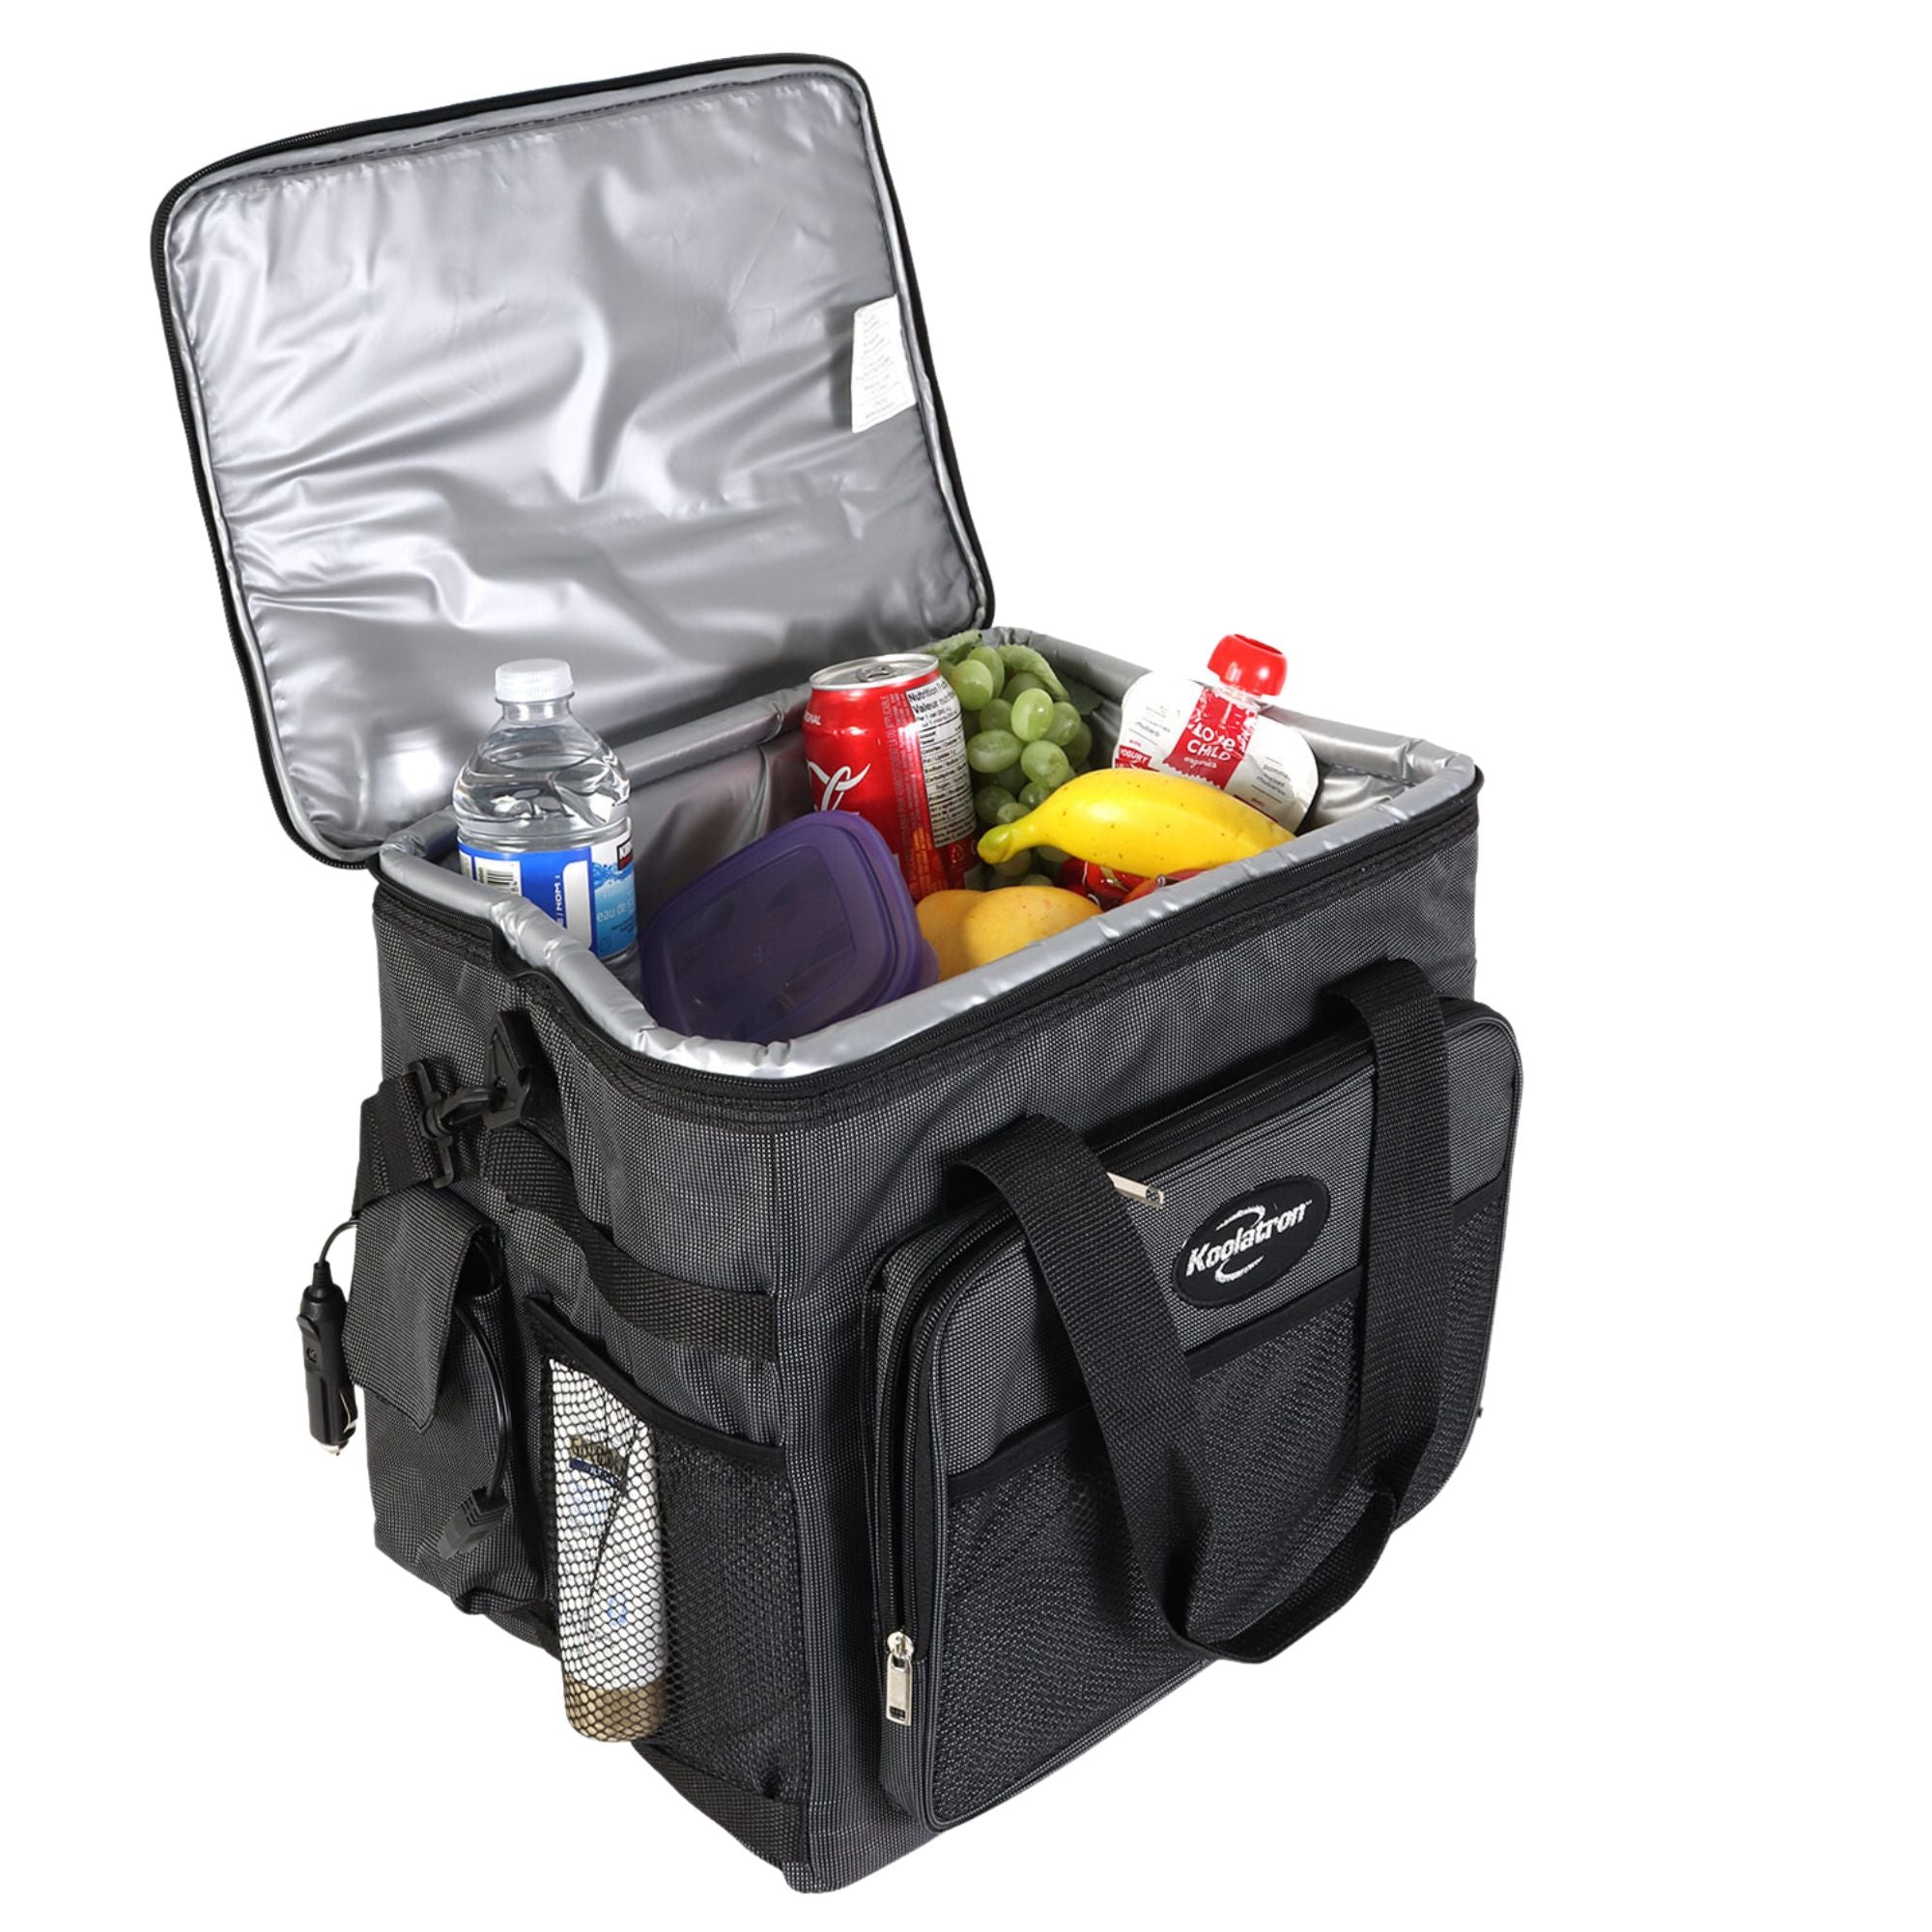 Koolatron 12V travel cooler, open with food and drinks inside, on a white background